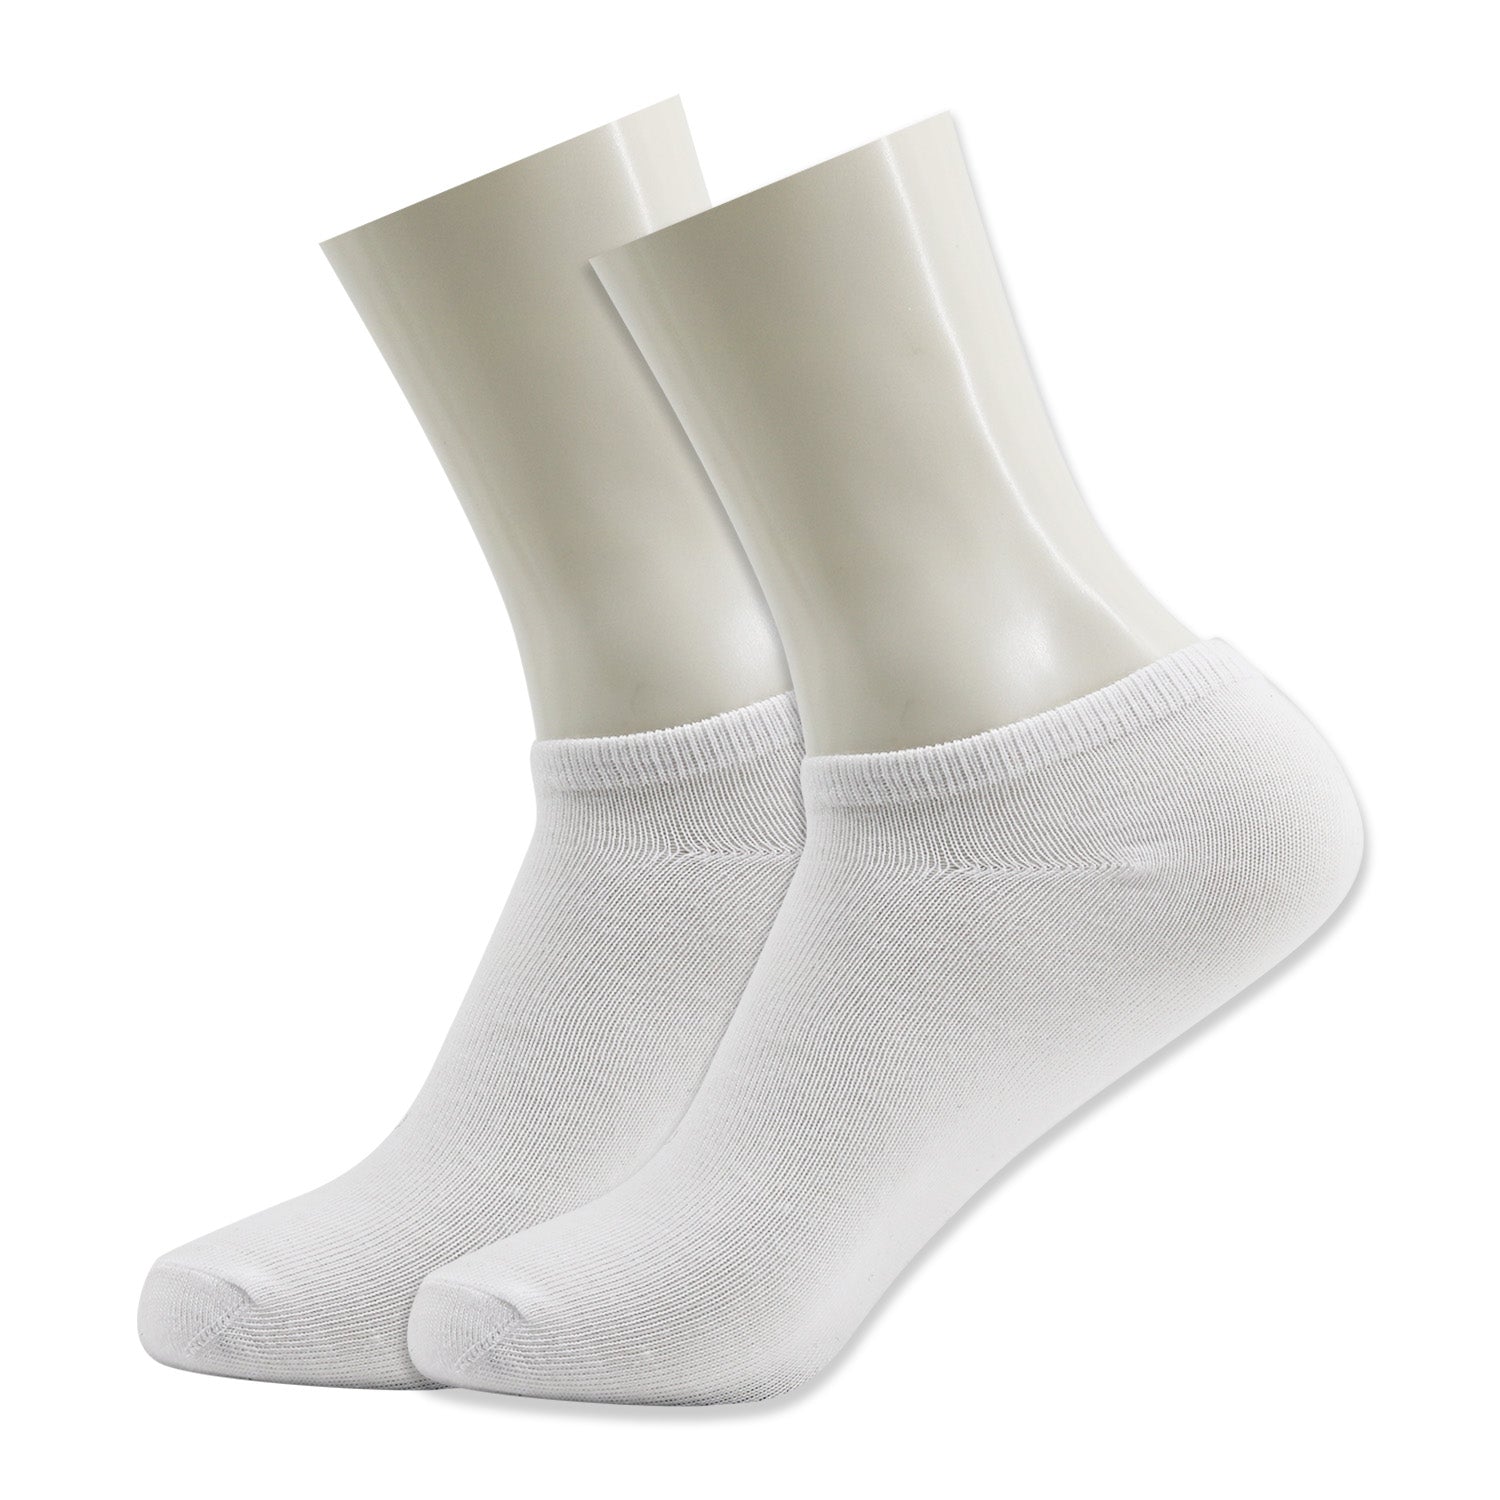 Women's No Show Wholesale Sock, Size 9-11 in White- Bulk Case of 96 Pairs